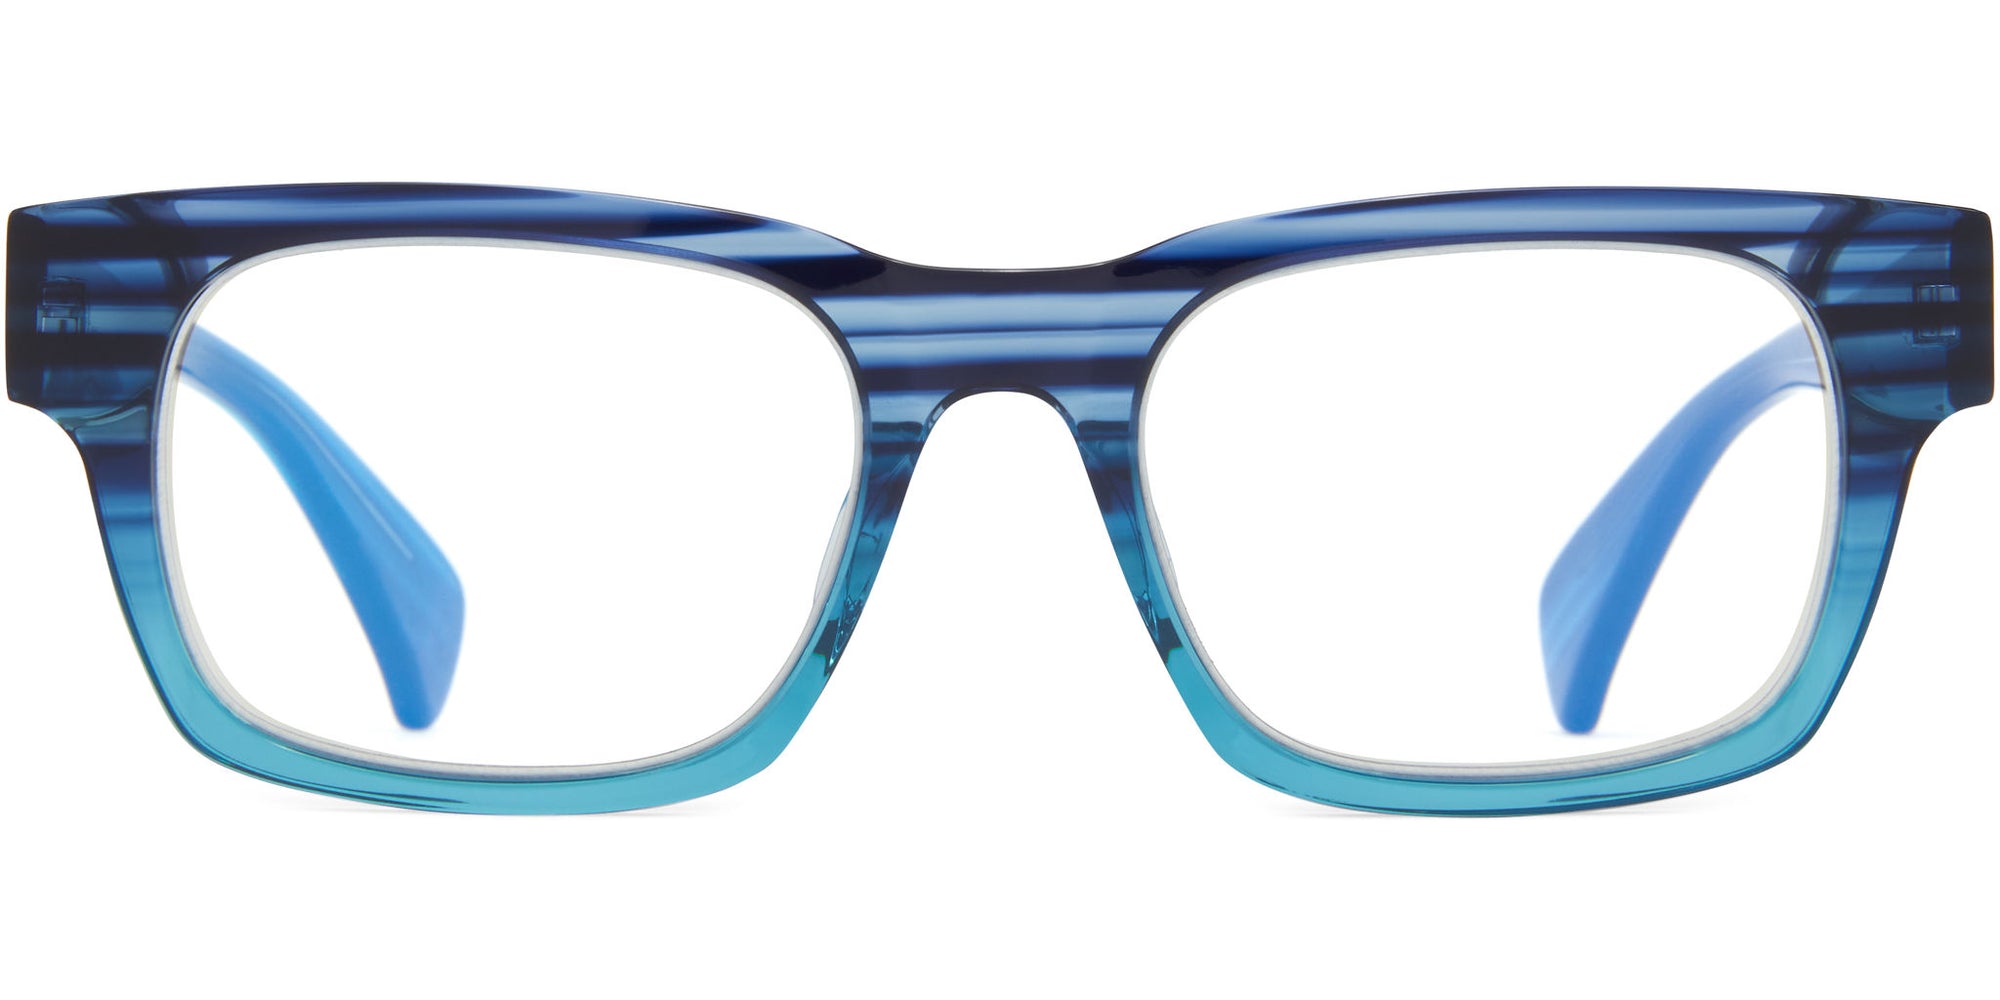 Men's Round Blue Light Filtering Acetate Glasses - Goodfellow & Co™ Brown